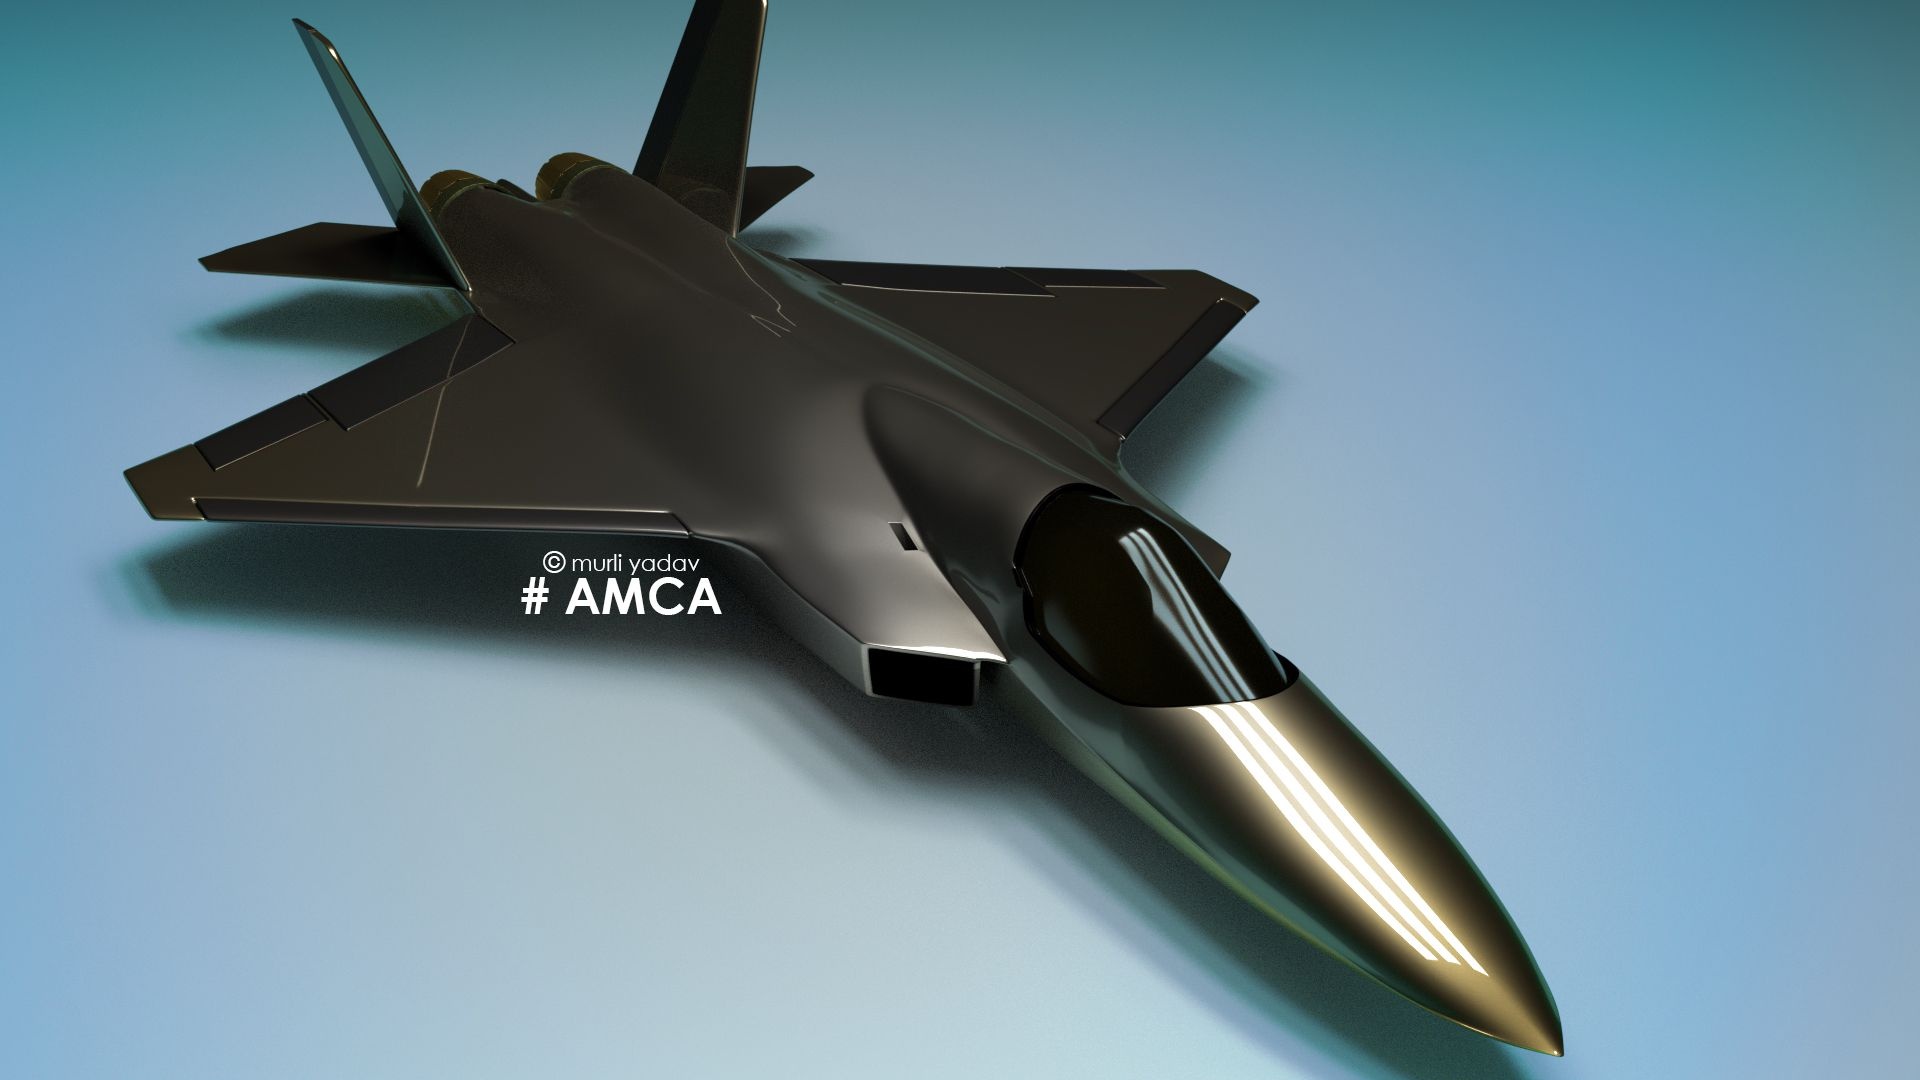 AMCA is an Indian programme to developing  a fifth generation fighter aircraft 2032